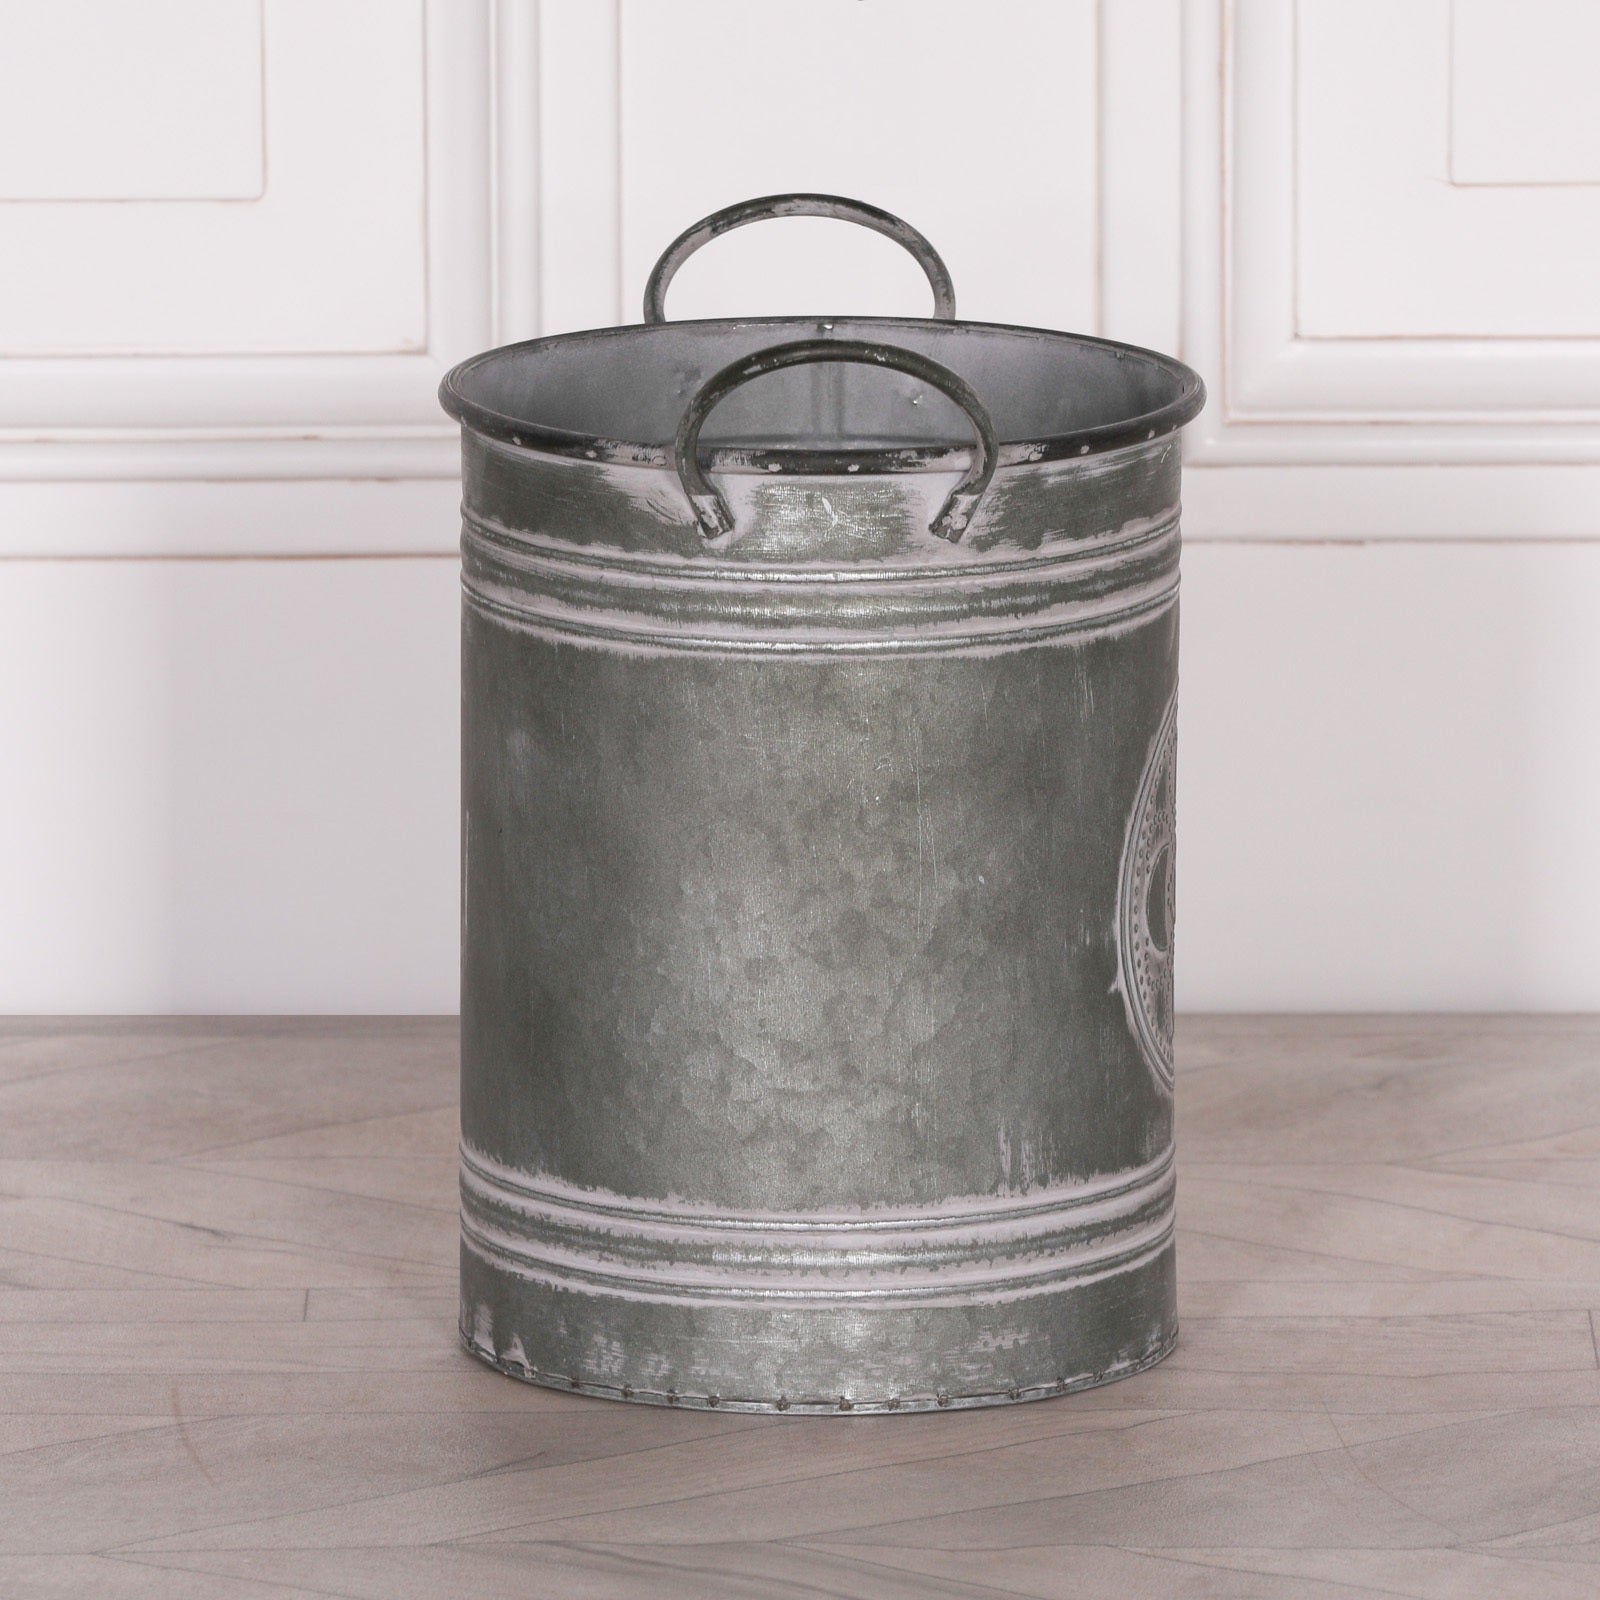 Metal Embossed Planter With Handles